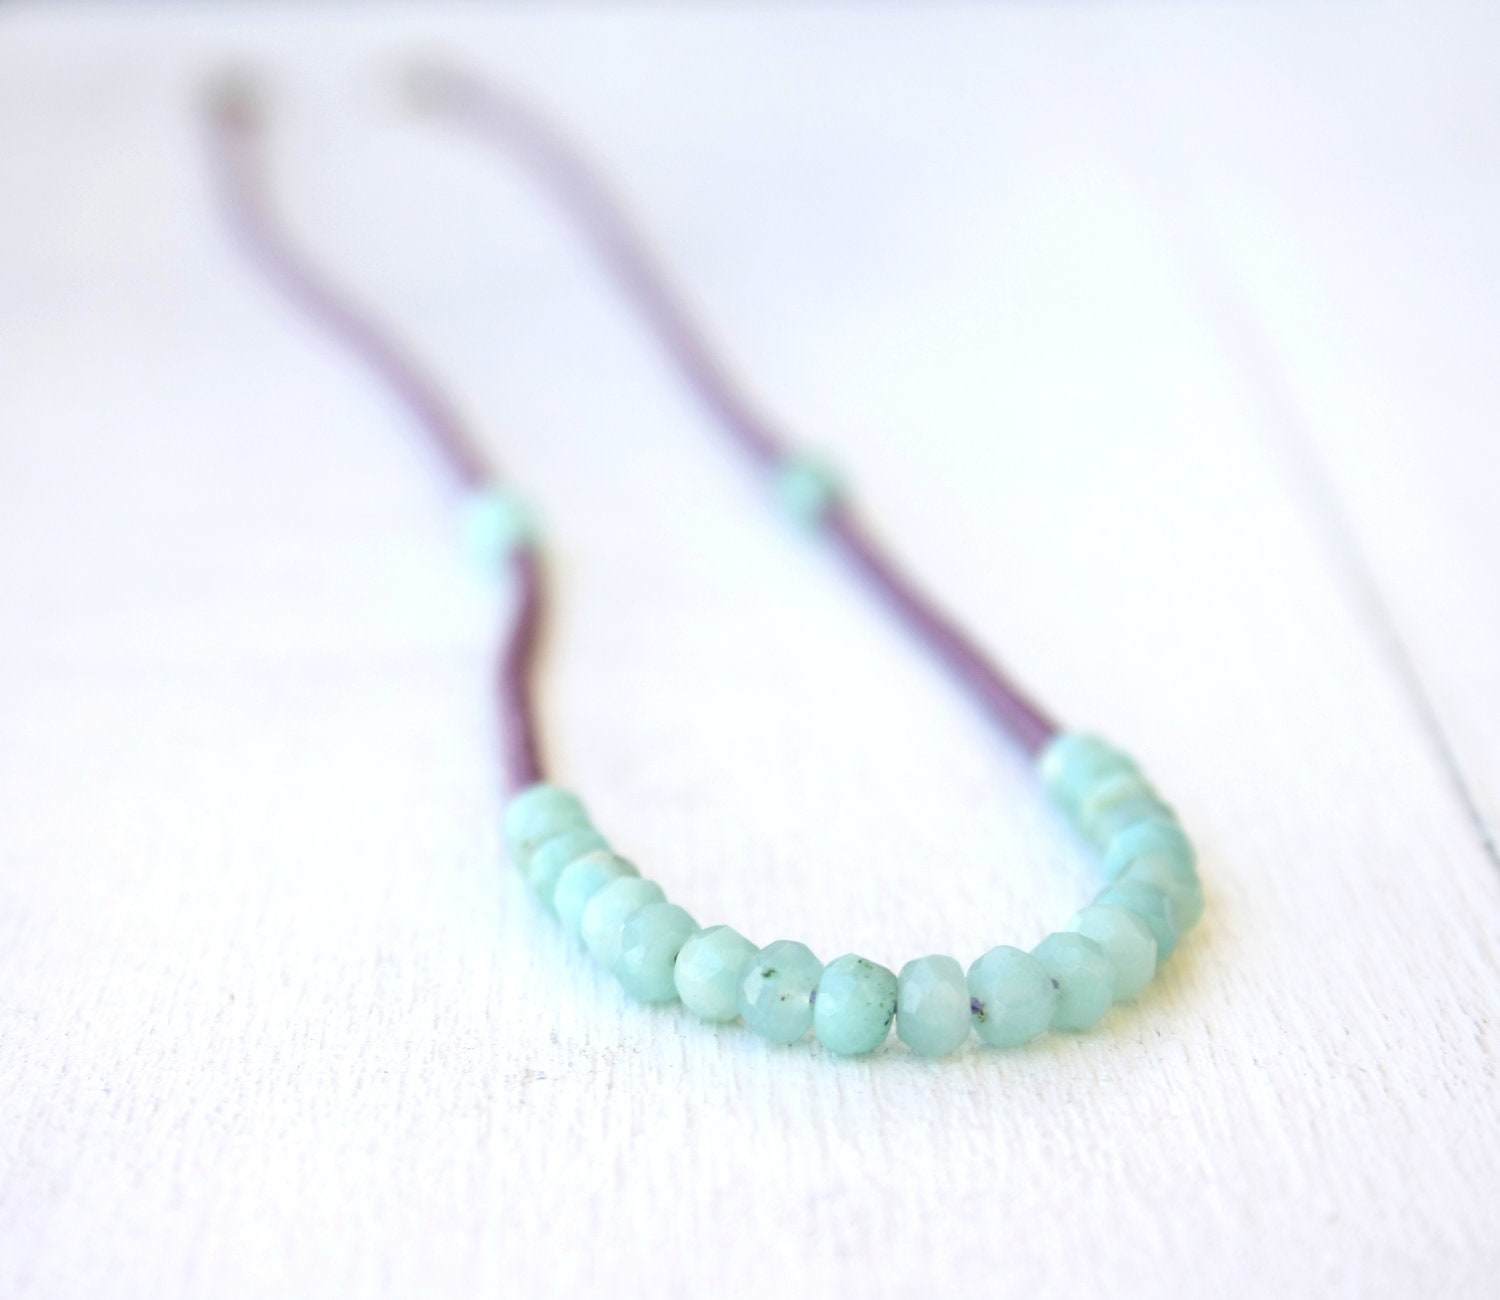 Purple and Seafoam Green necklace / beaded necklace mint and purple / spring summer fashion / pastel colors FREE SHIPPING - SilverLinesJewelry